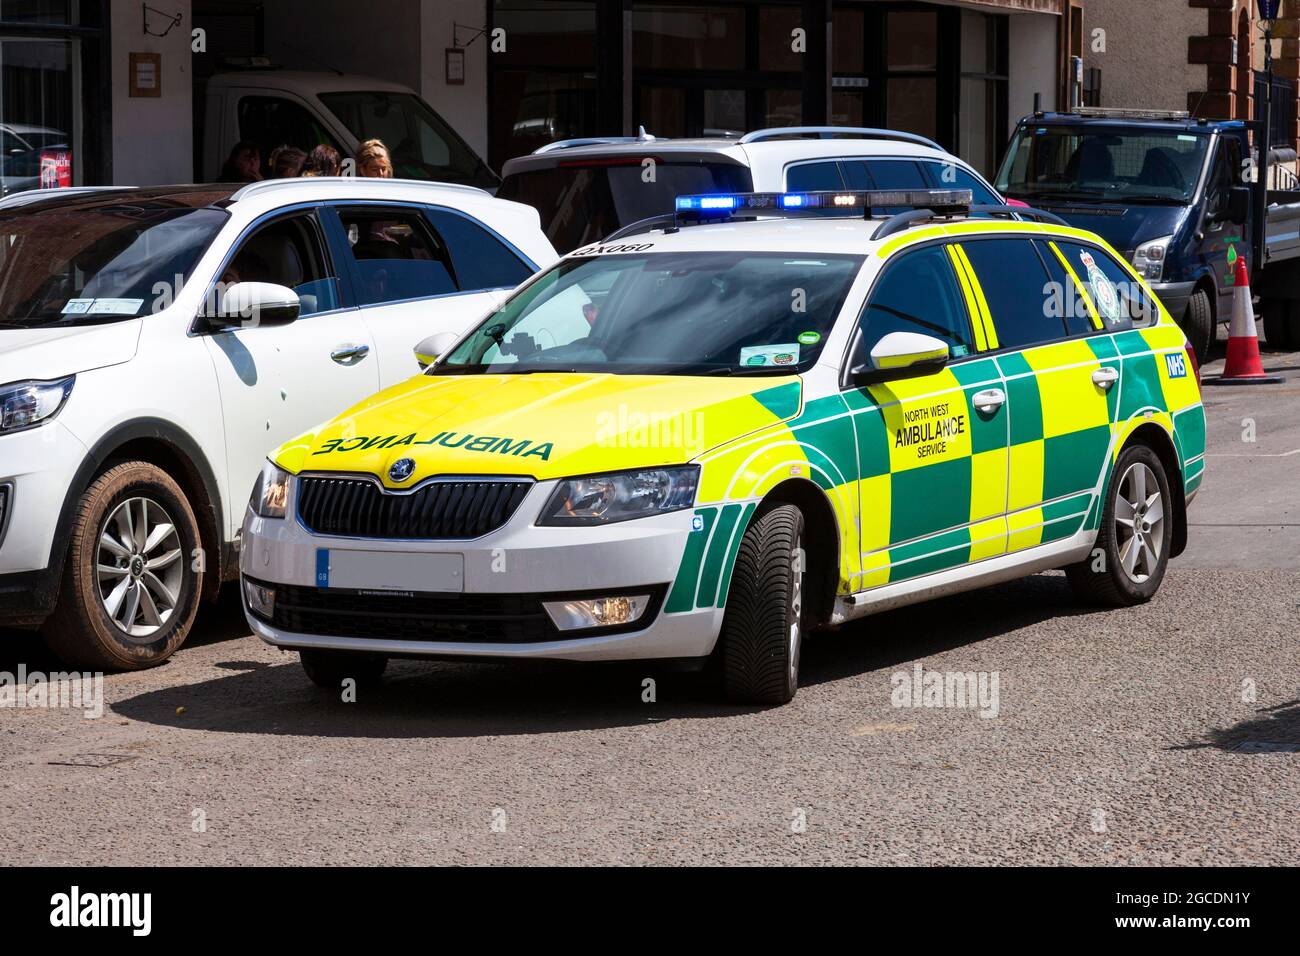 A North West Ambulance Service Paramedic on an emergency call in the U.K. Stock Photo